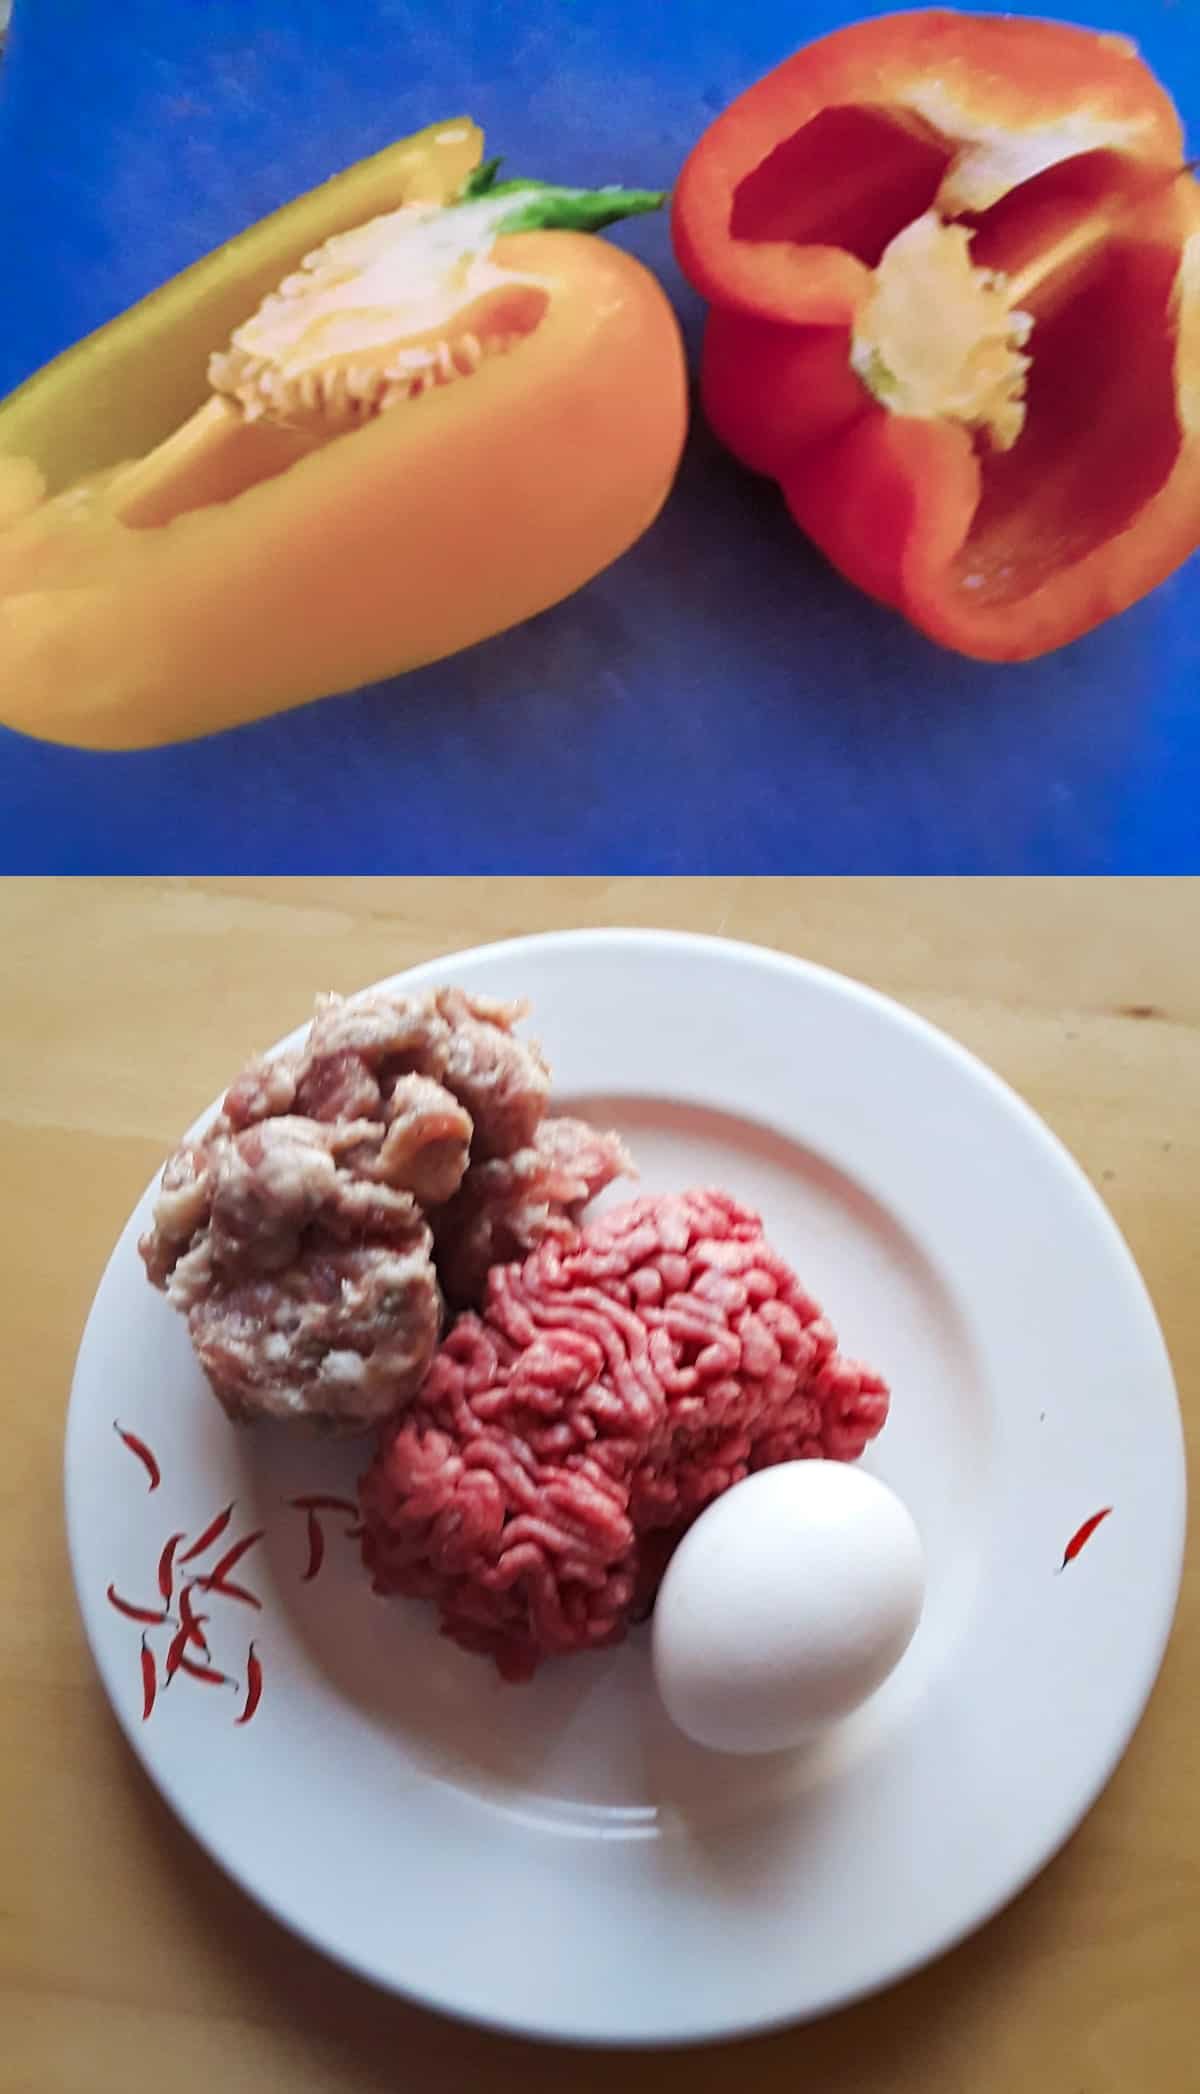 Half yellow and red bell peppers on blue cutting mat near plate with Italian sausage, ground beef and an egg.